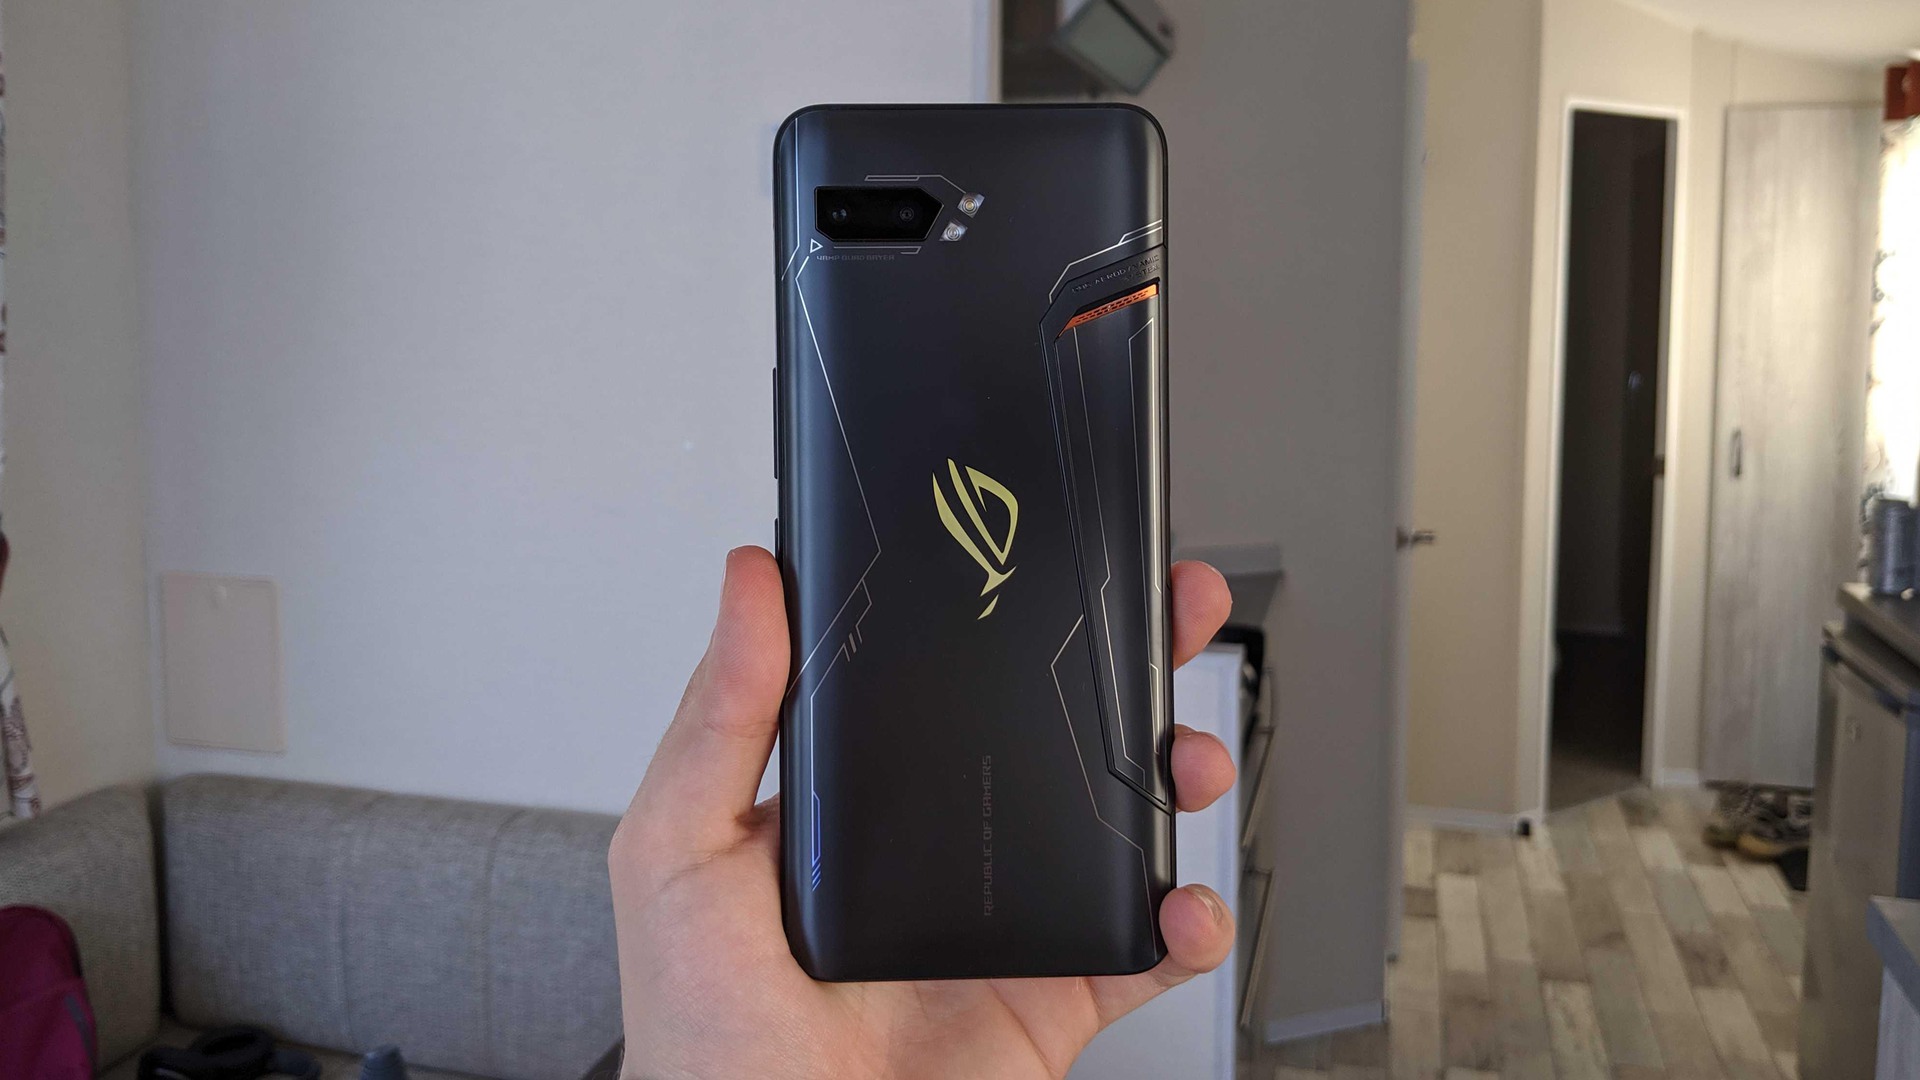 Asus ROG 3 Smartphone Review in Hindi - Price in India, Full Specifications, Features Proccser Camera Battery RAM Storage, Buy Asus ROG Phone 3 Online at Best Price in India